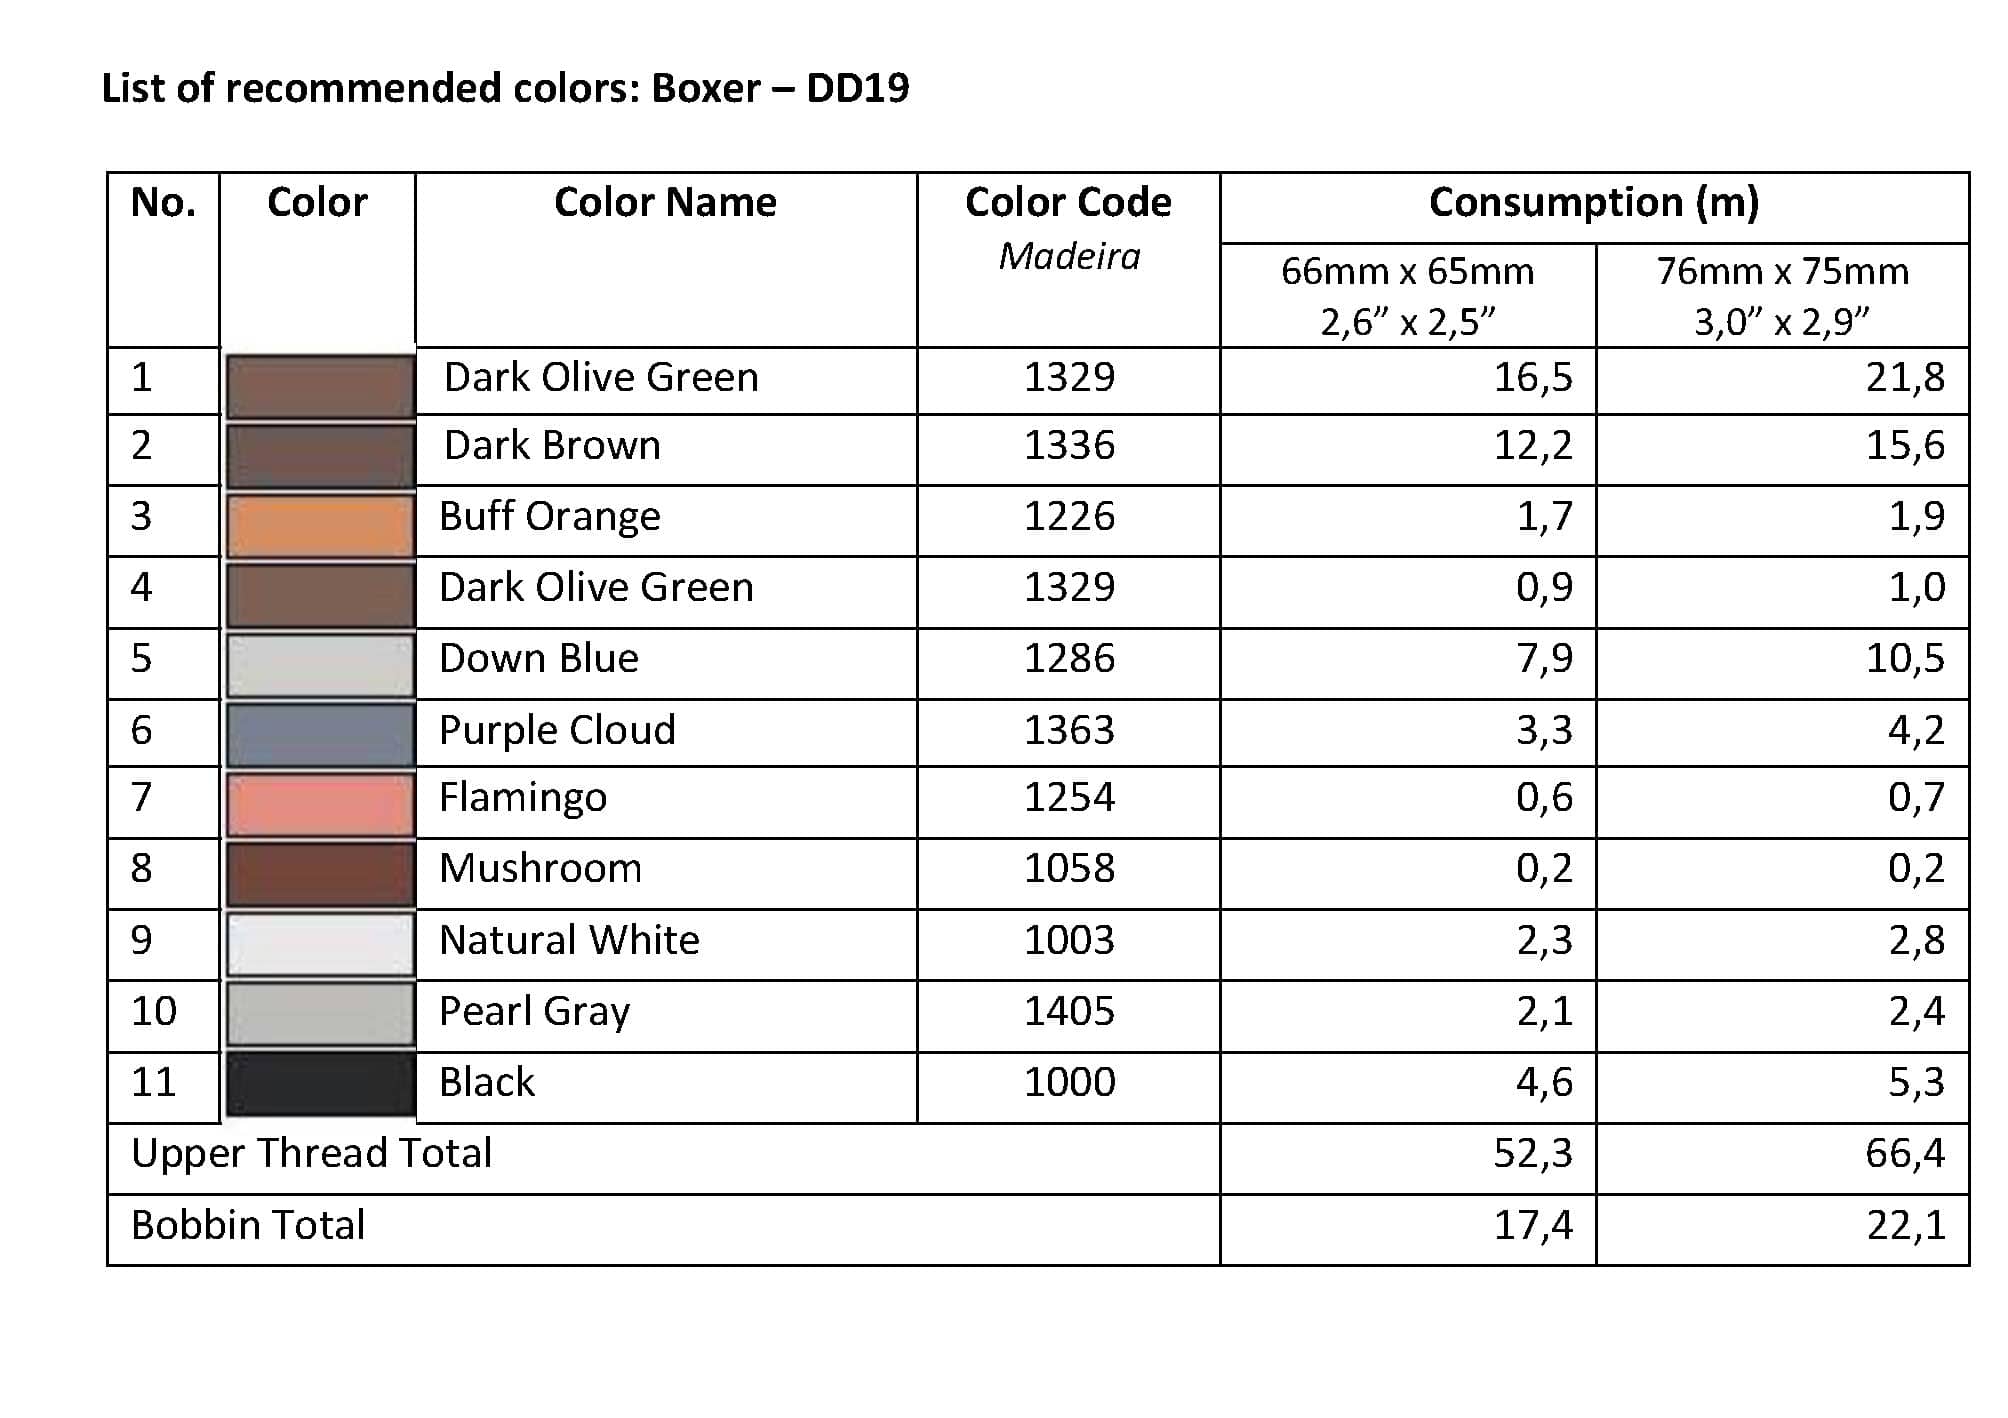 List of Recommended Colors - Boxer DD19